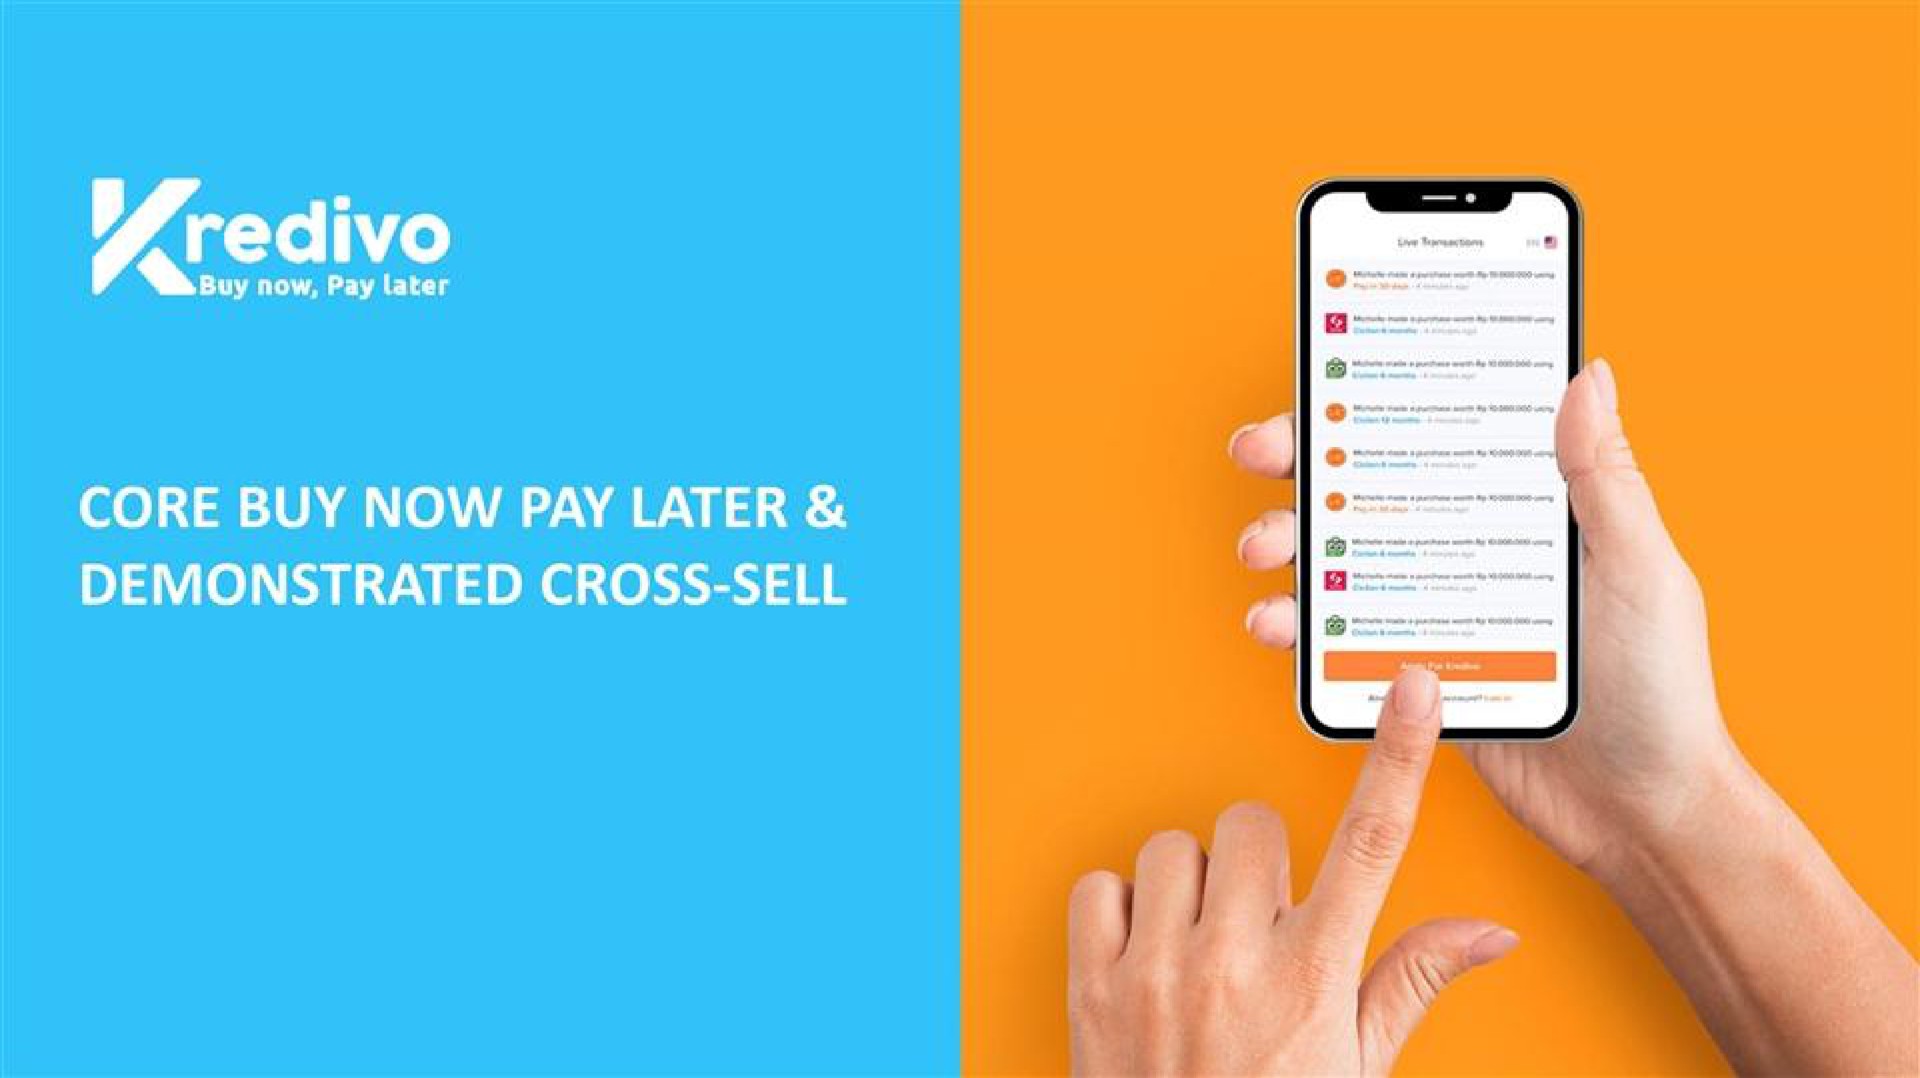 core buy now pay later demonstrated cross sell | Kredivo